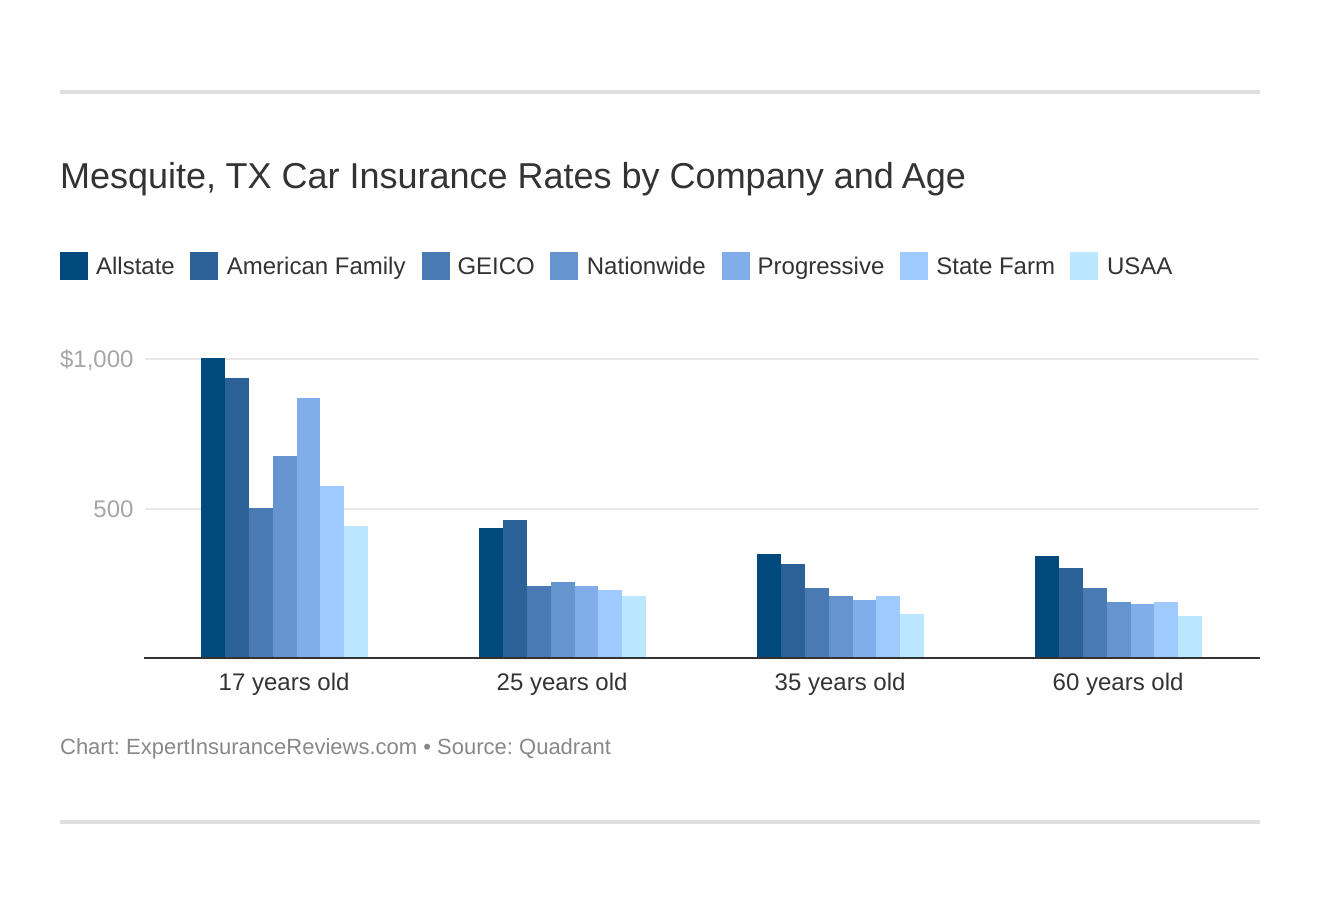 Mesquite, TX Car Insurance Rates by Company and Age